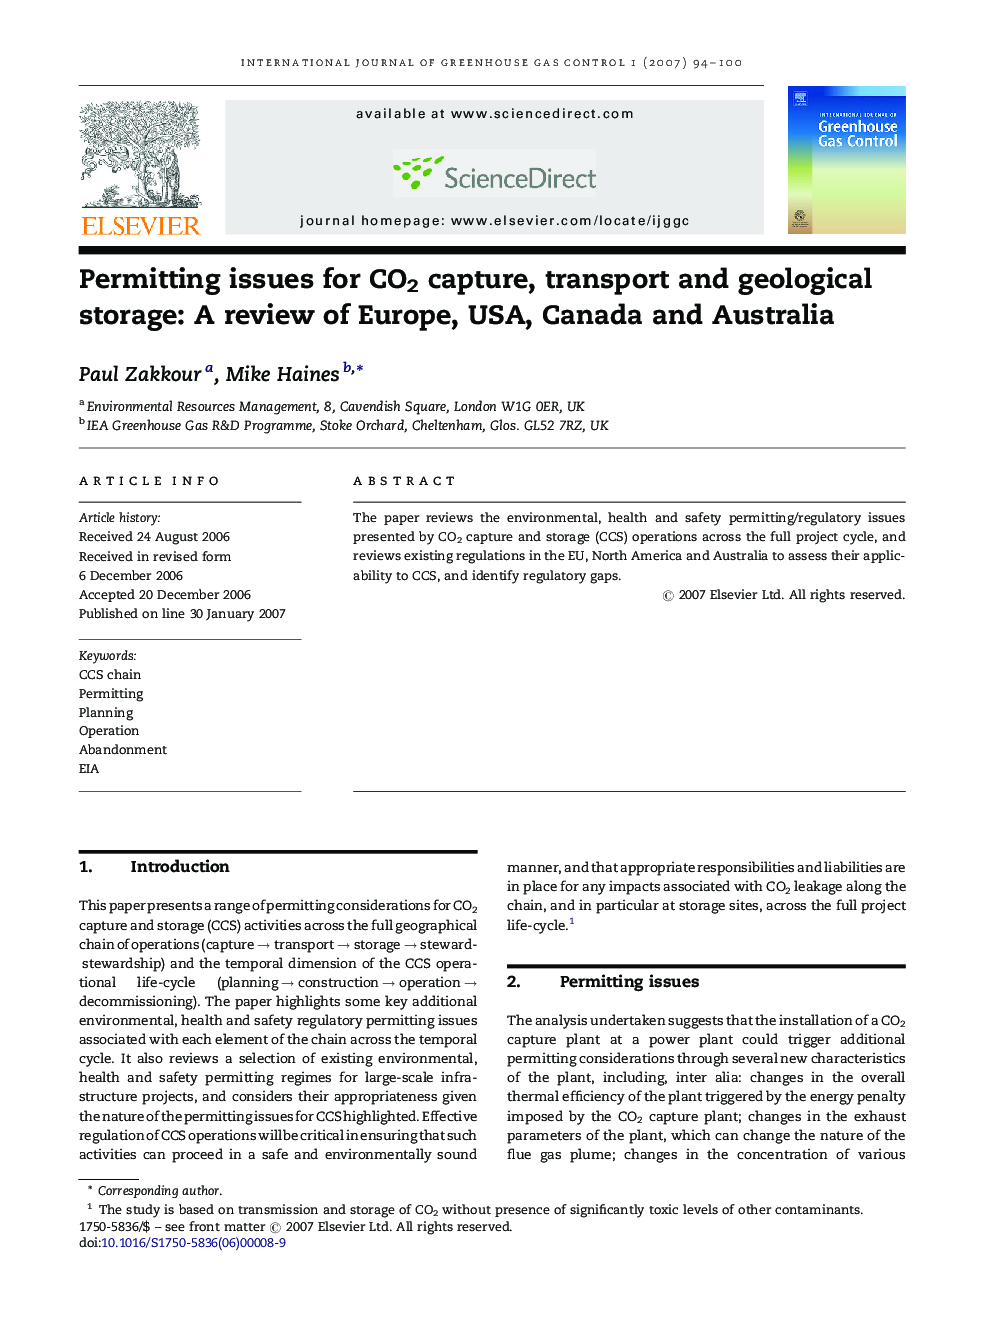 Permitting issues for CO2 capture, transport and geological storage: A review of Europe, USA, Canada and Australia